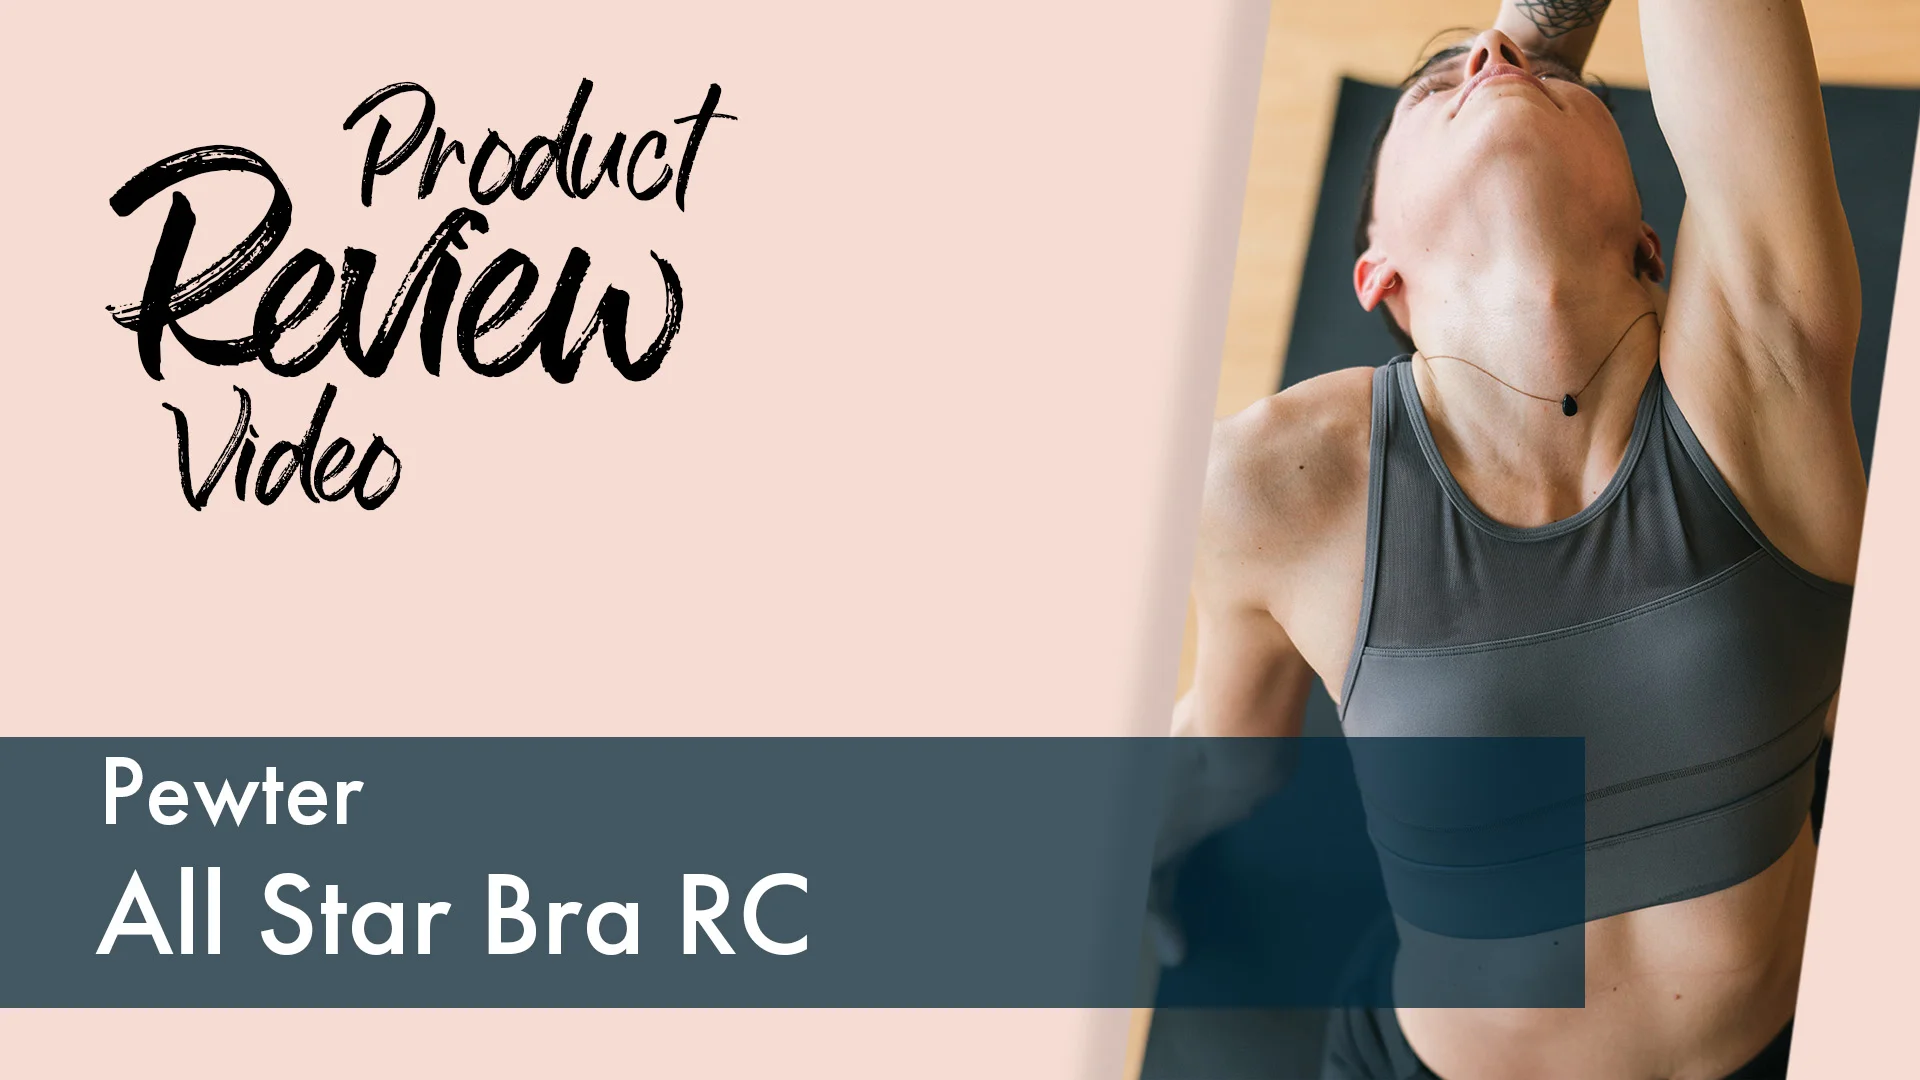 Zyia Active Pewter All Star Bra RC #808 on Vimeo